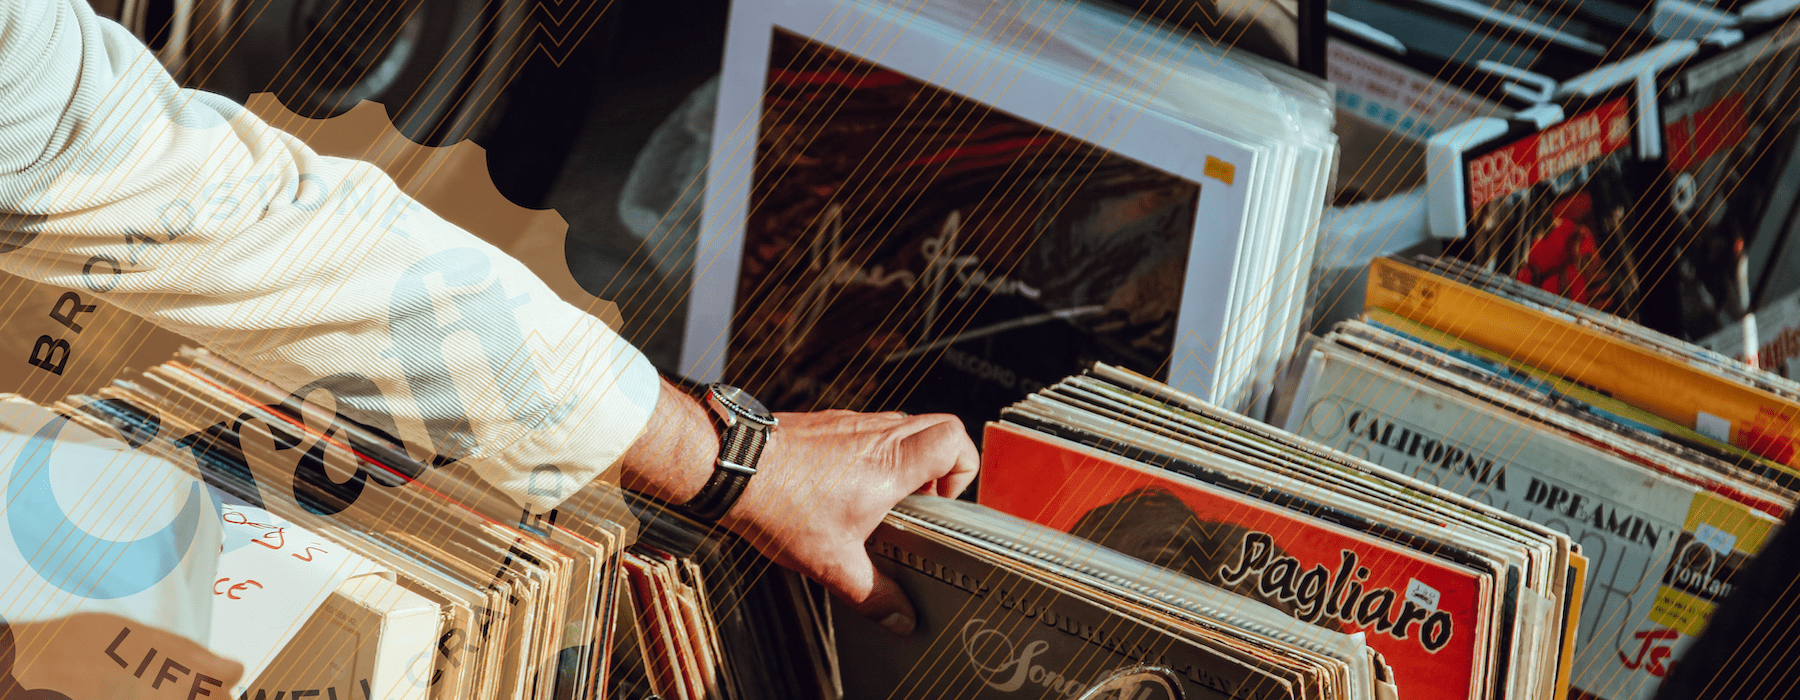 lifestyle image of a person reaching down to look at records 